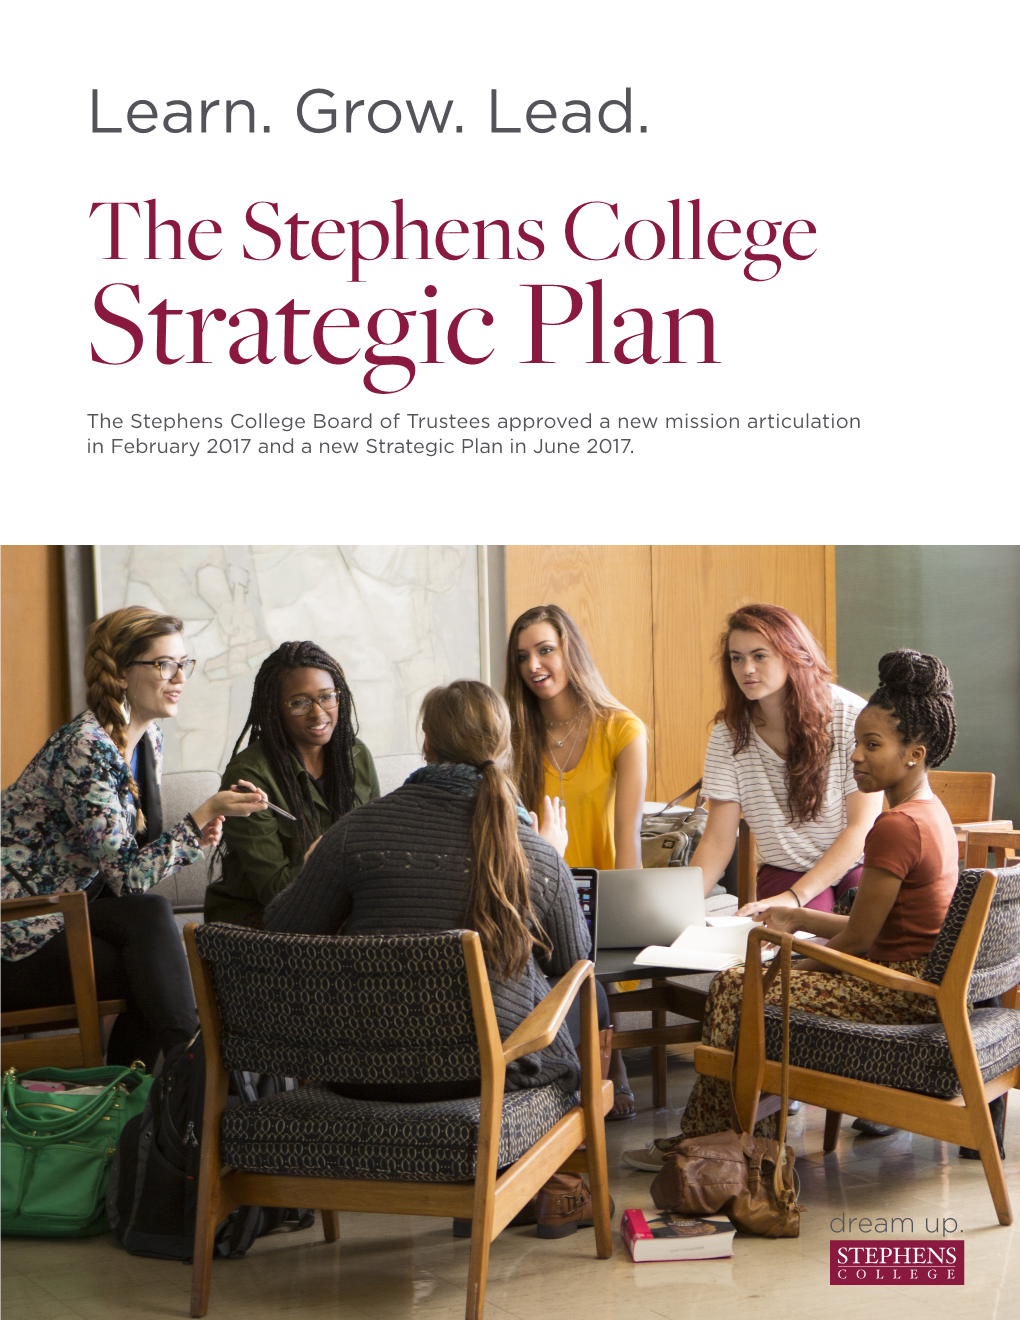 The Stephens College Strategic Plan the Stephens College Board of Trustees Approved a New Mission Articulation in February 2017 and a New Strategic Plan in June 2017